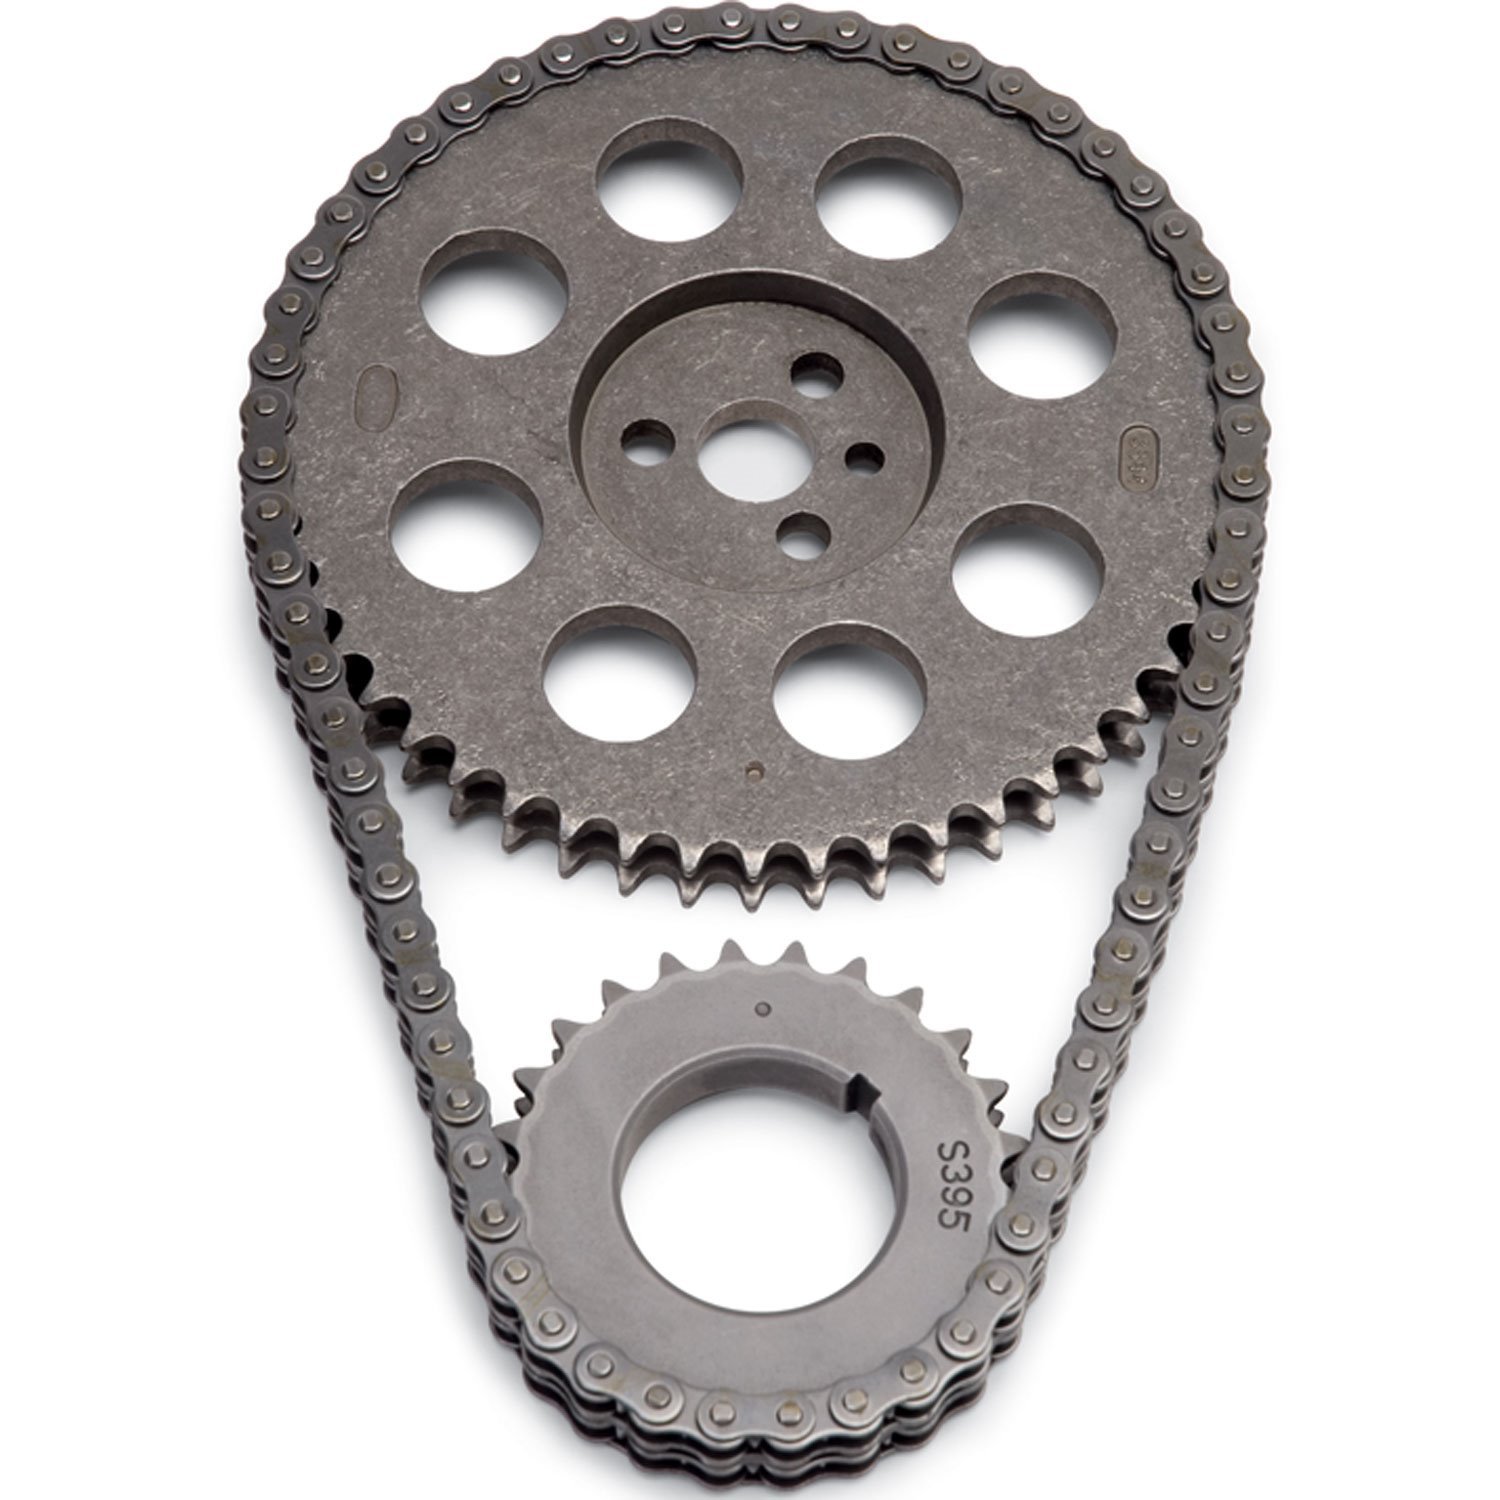 Stock Replacement Performer-Link Timing Chain Set for 1965-1995